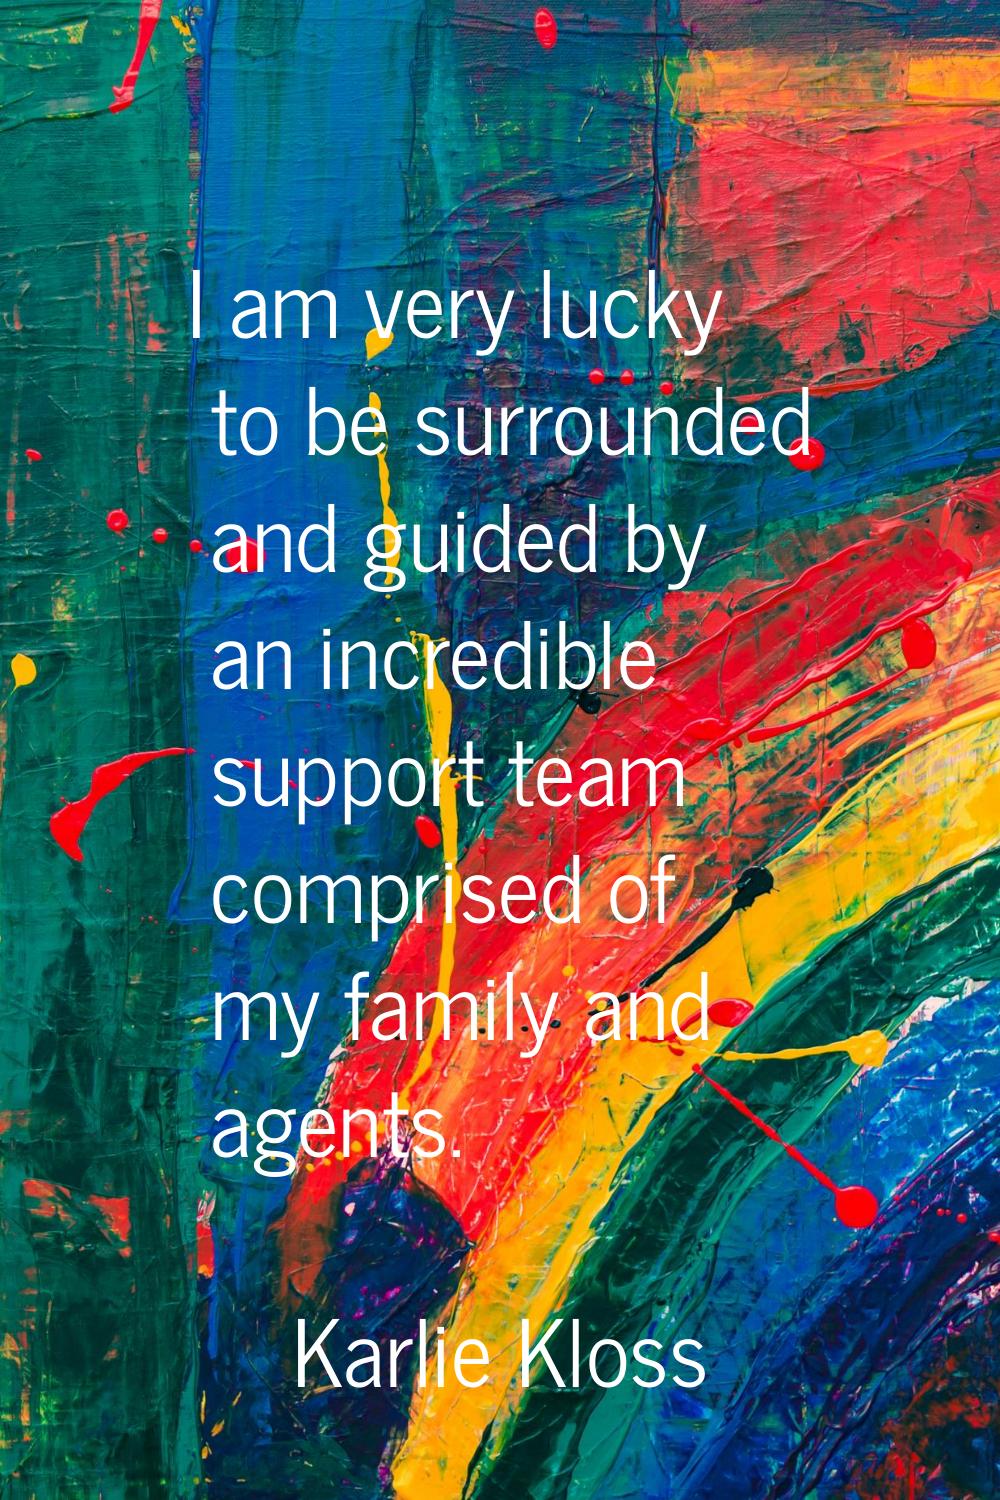 I am very lucky to be surrounded and guided by an incredible support team comprised of my family an